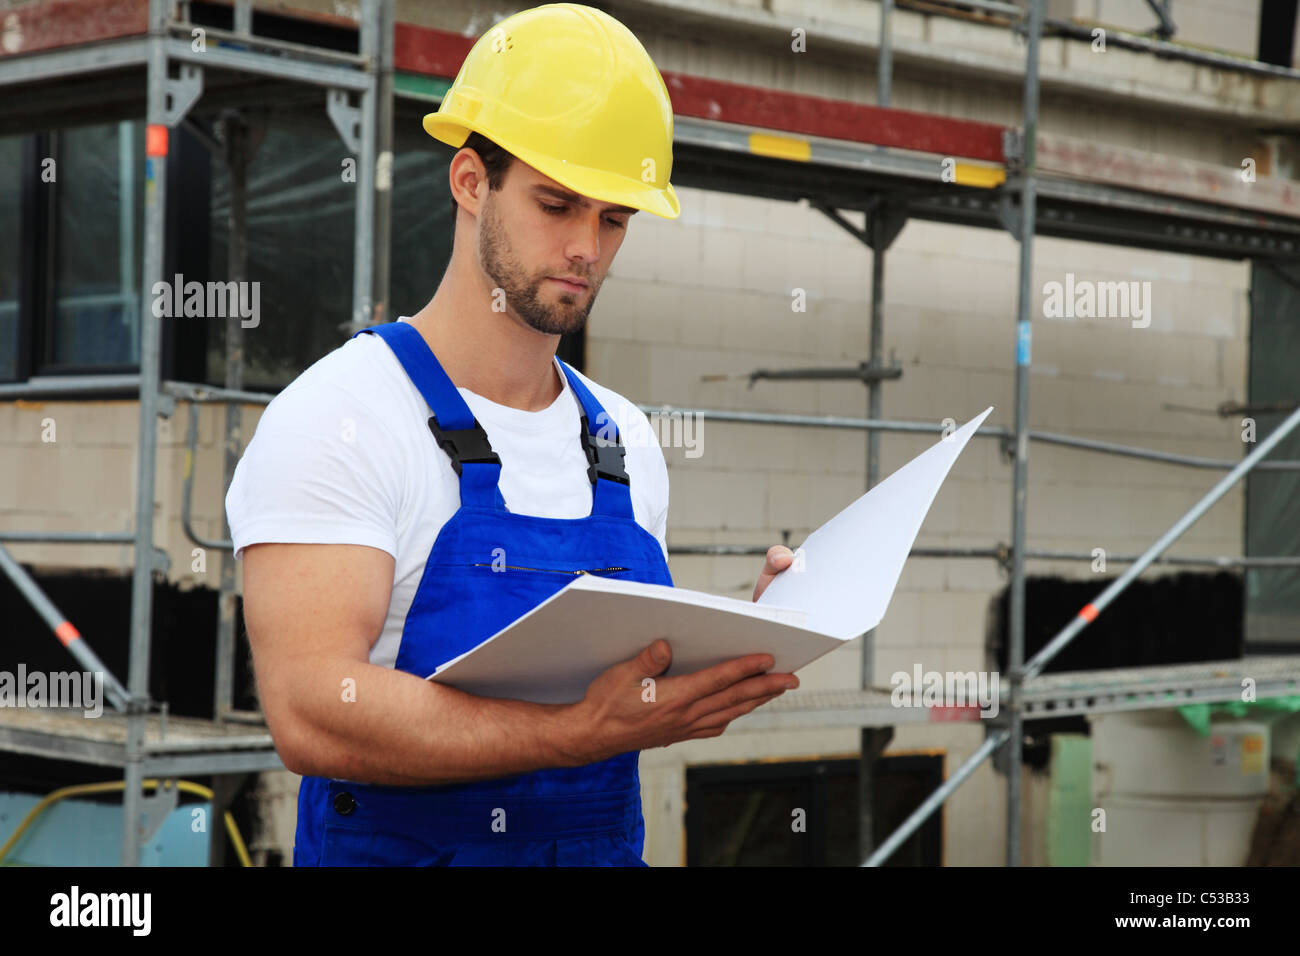 Manual worker on construction site during building inspection. Stock Photo